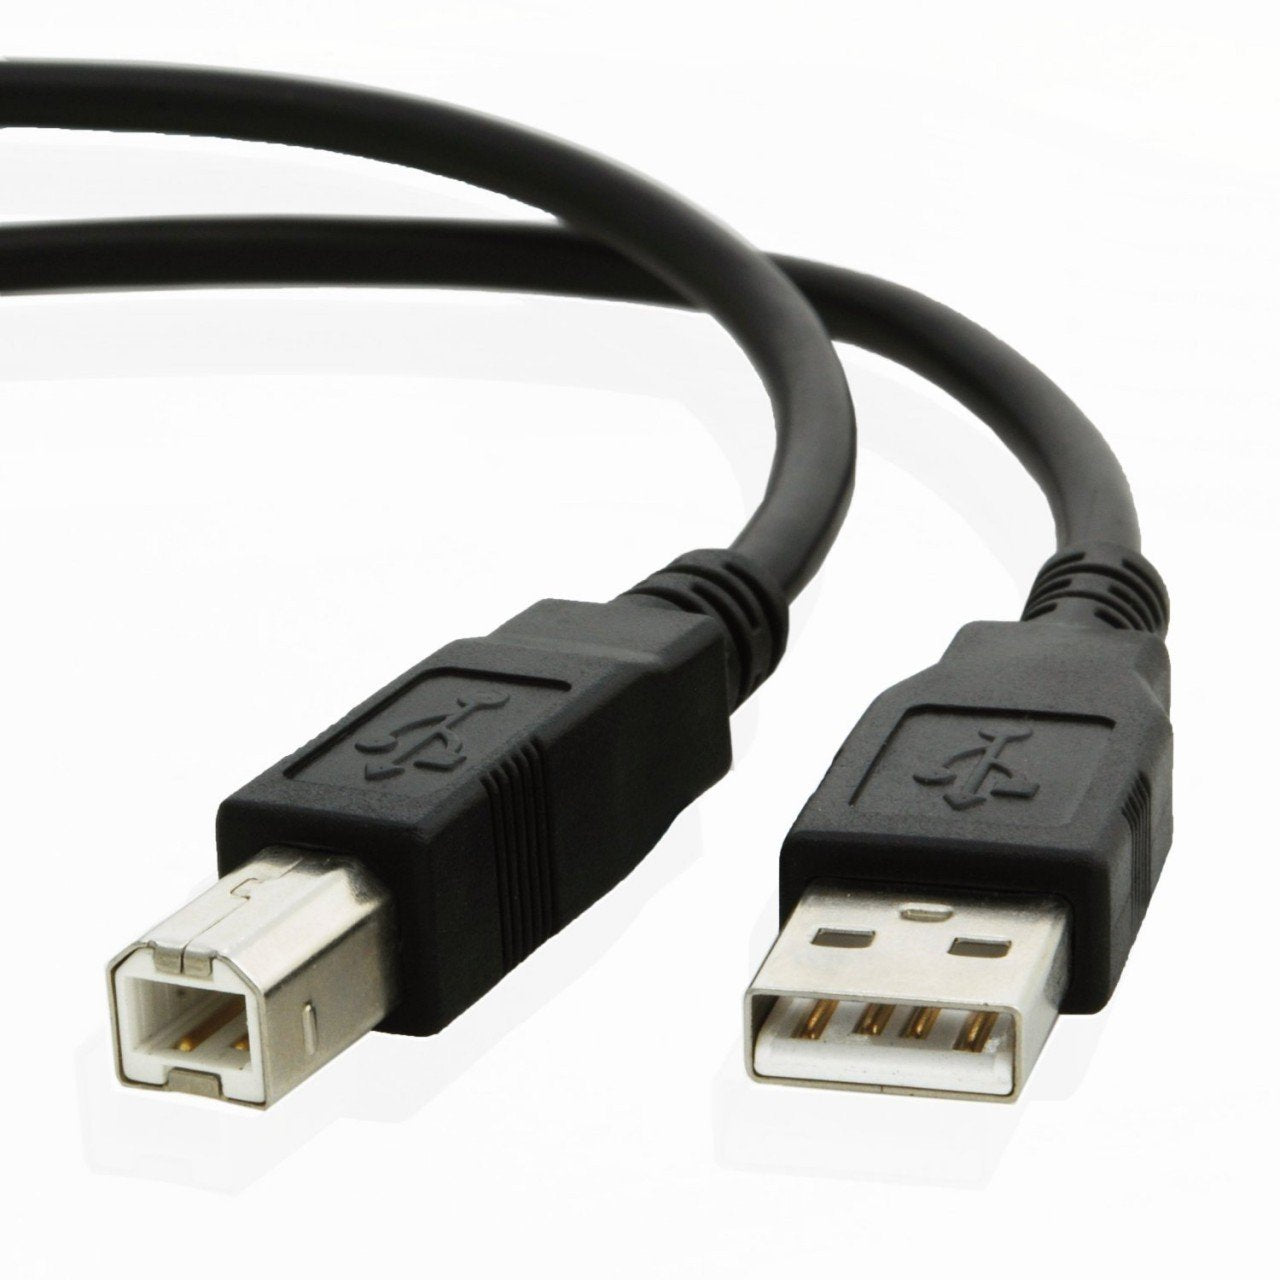 USB cable for Casio KEYBOARD SA-76